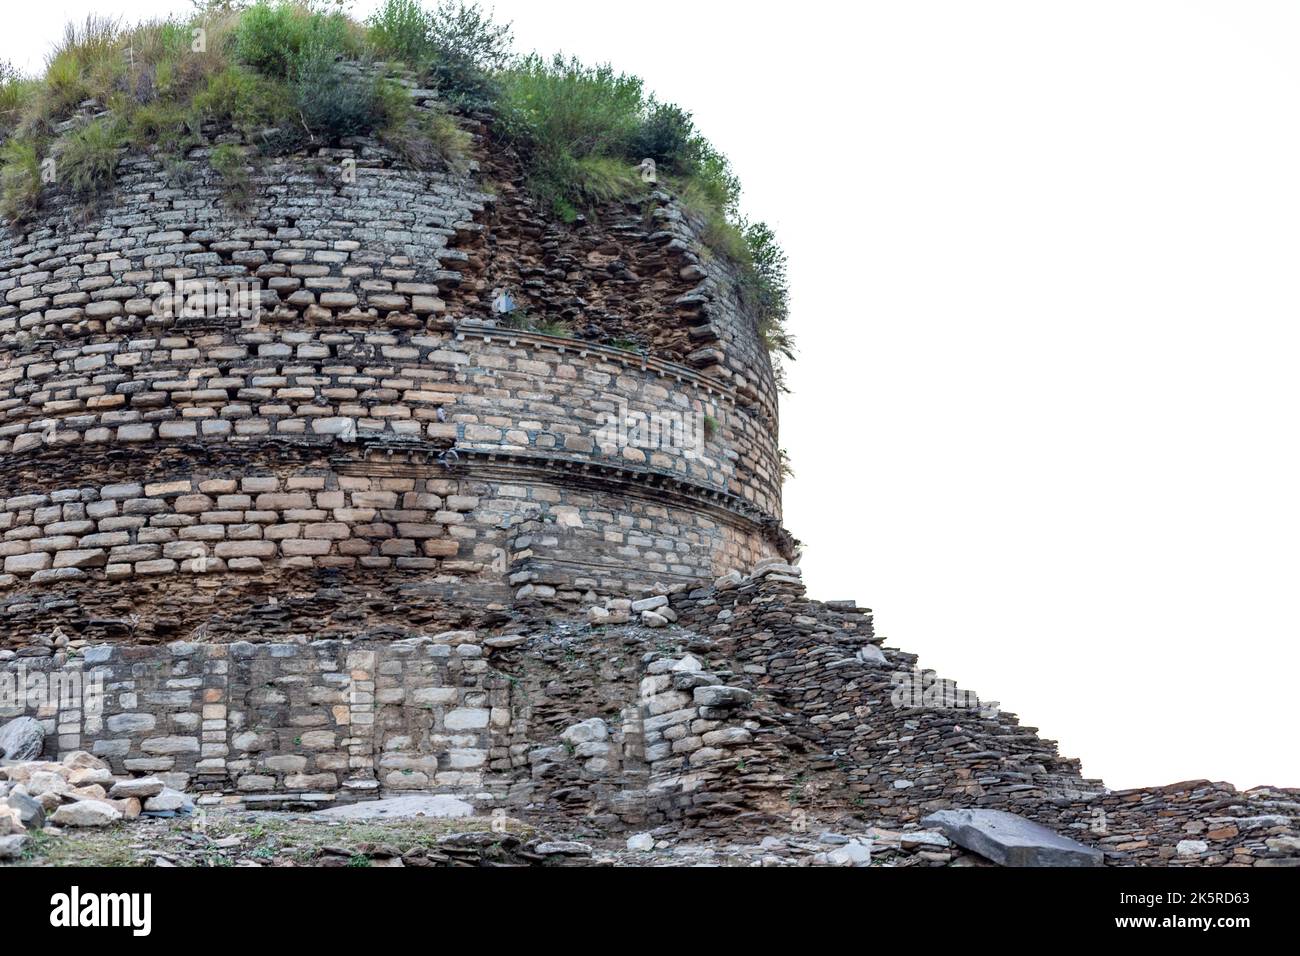 The Amluk dara stupa buddhist place believed to be built in the 2nd-9th CE Stock Photo